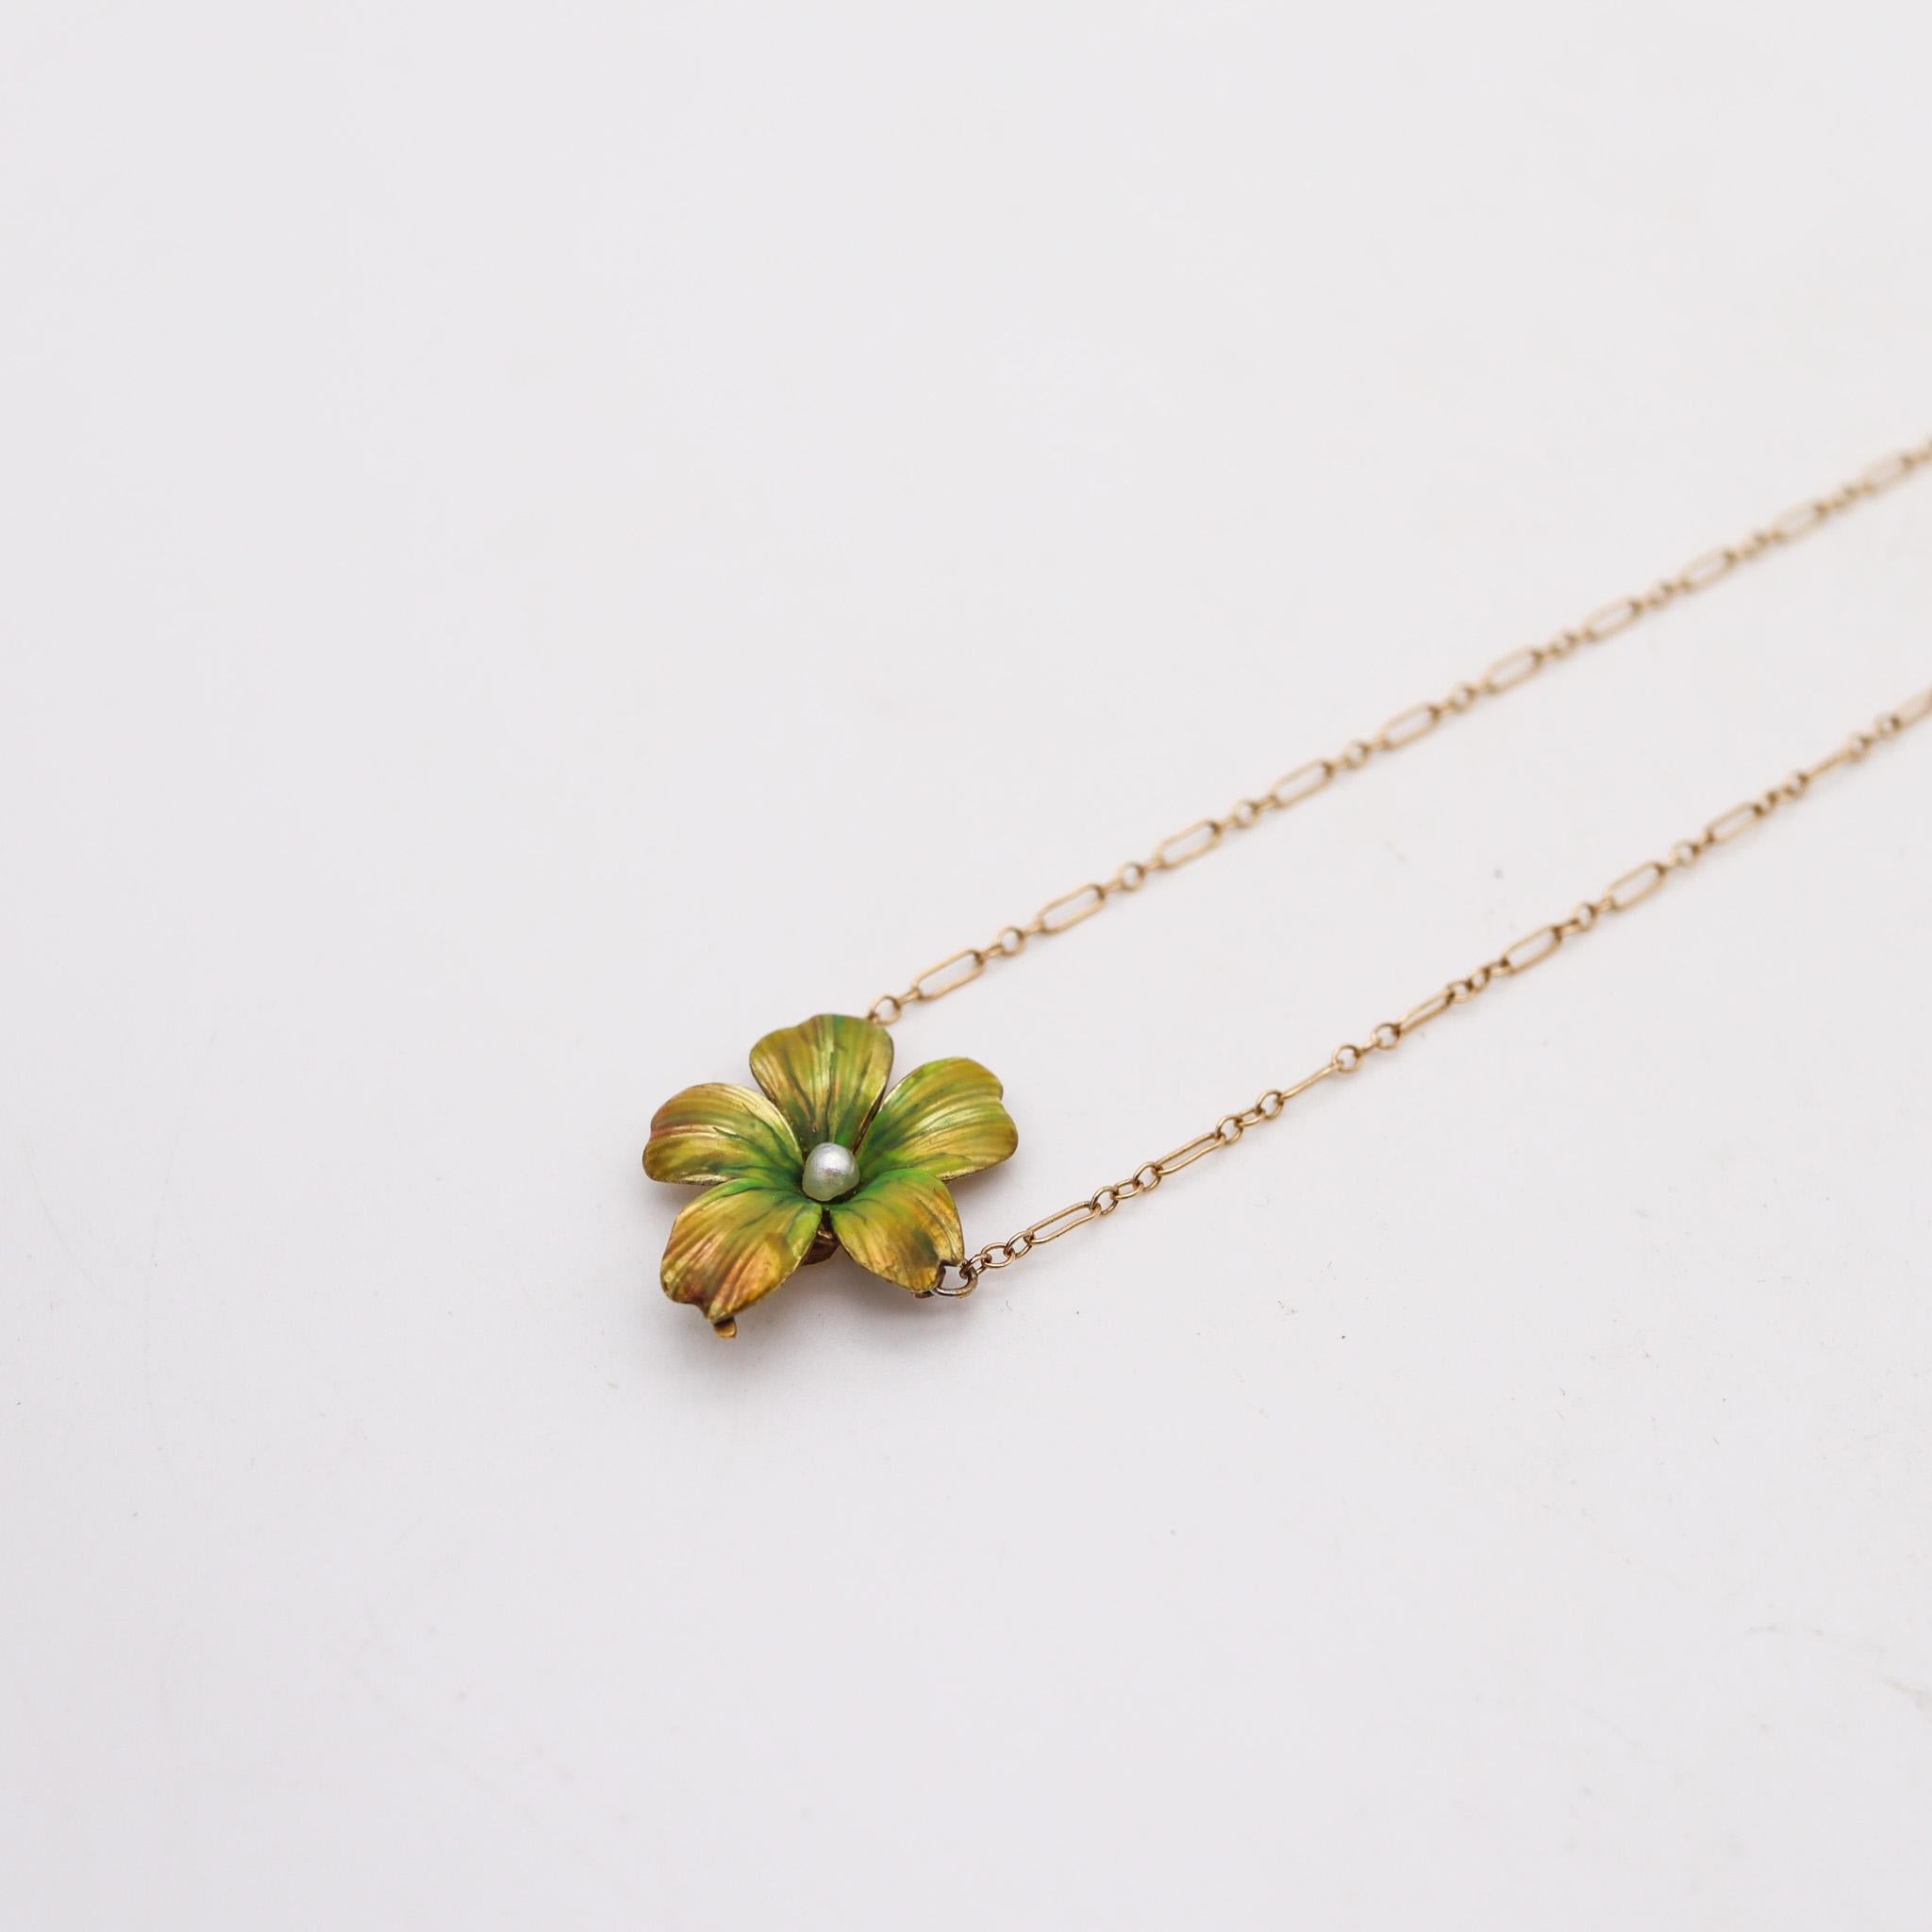 Round Cut Art Nouveau Edwardian 1905 Green Enamel Flower Necklace In 14Kt Gold With Pearl